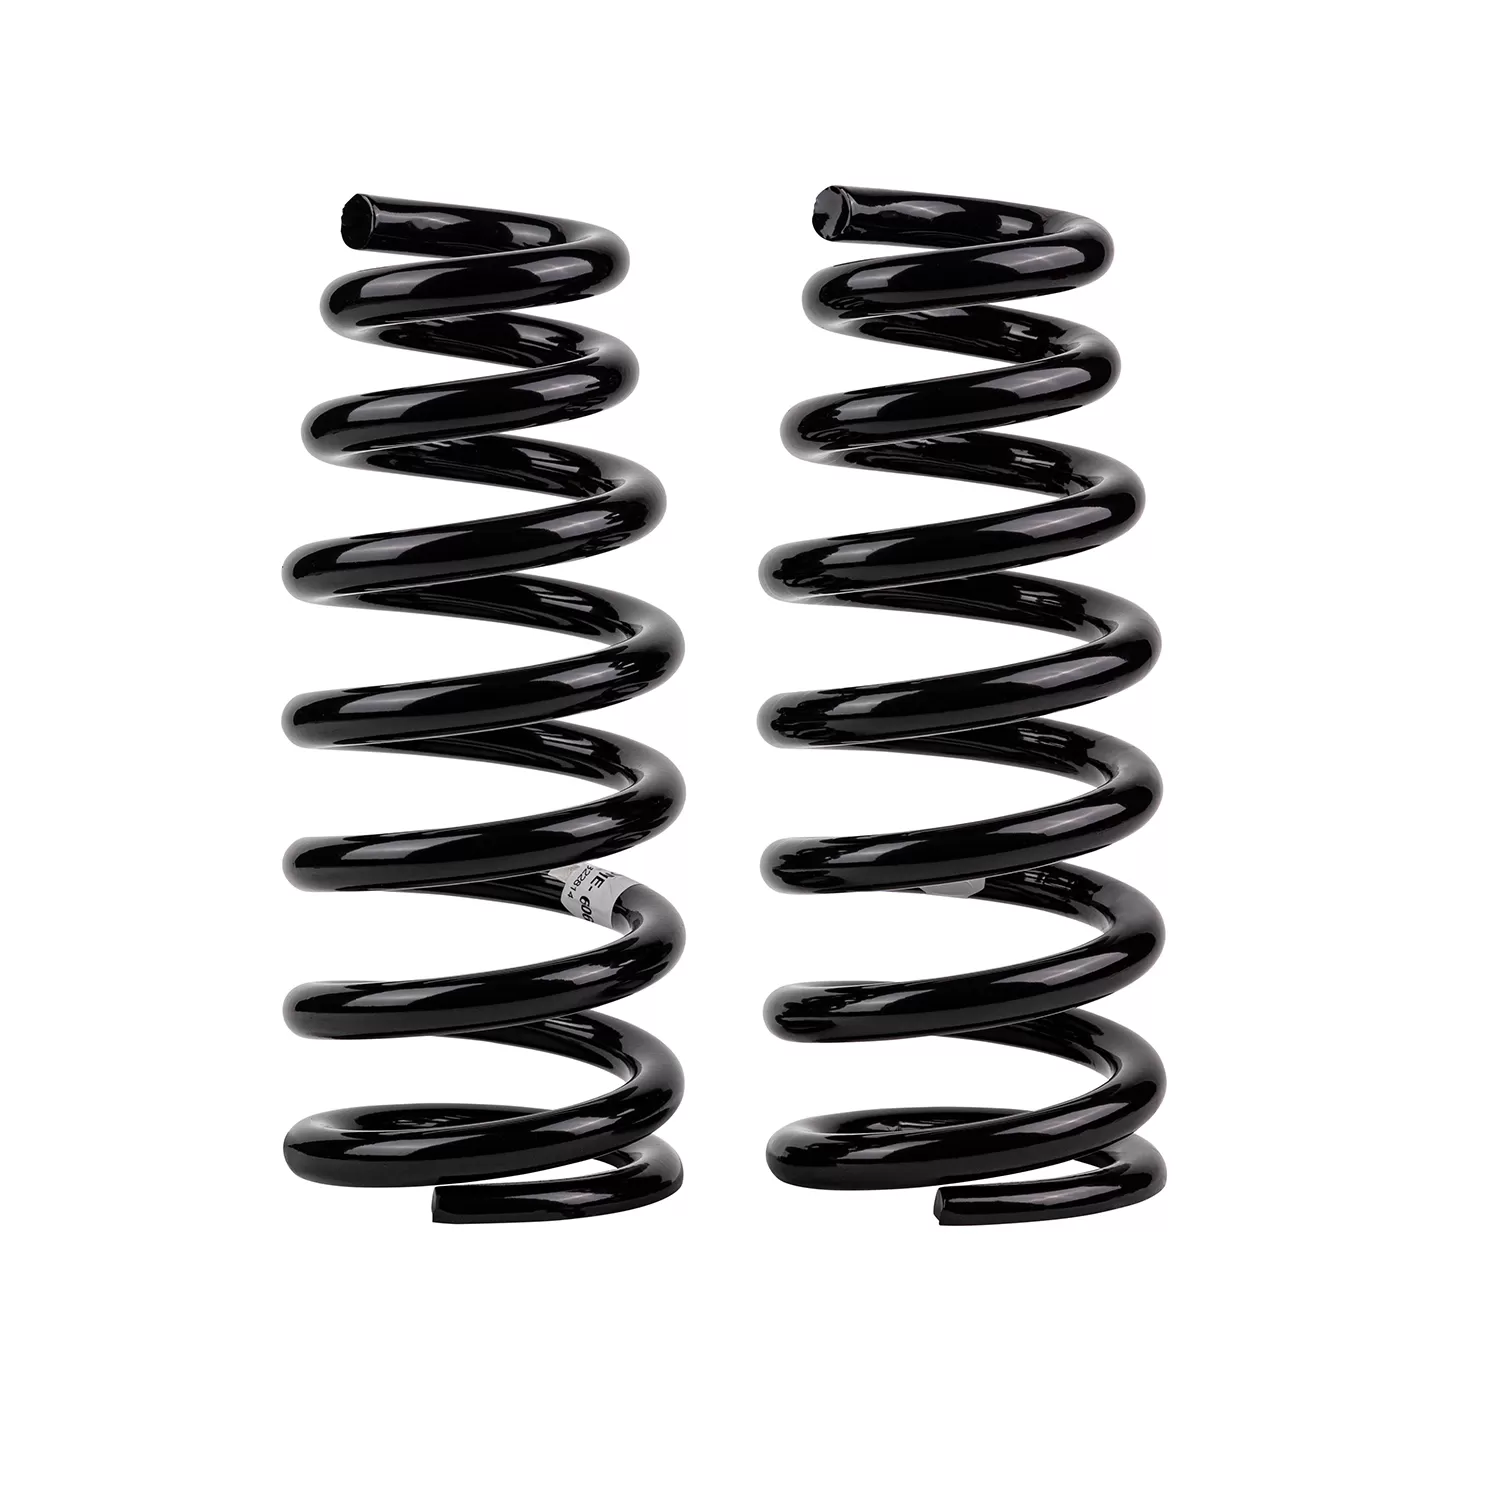 Old Man EMU OME Coil Spring - 2606